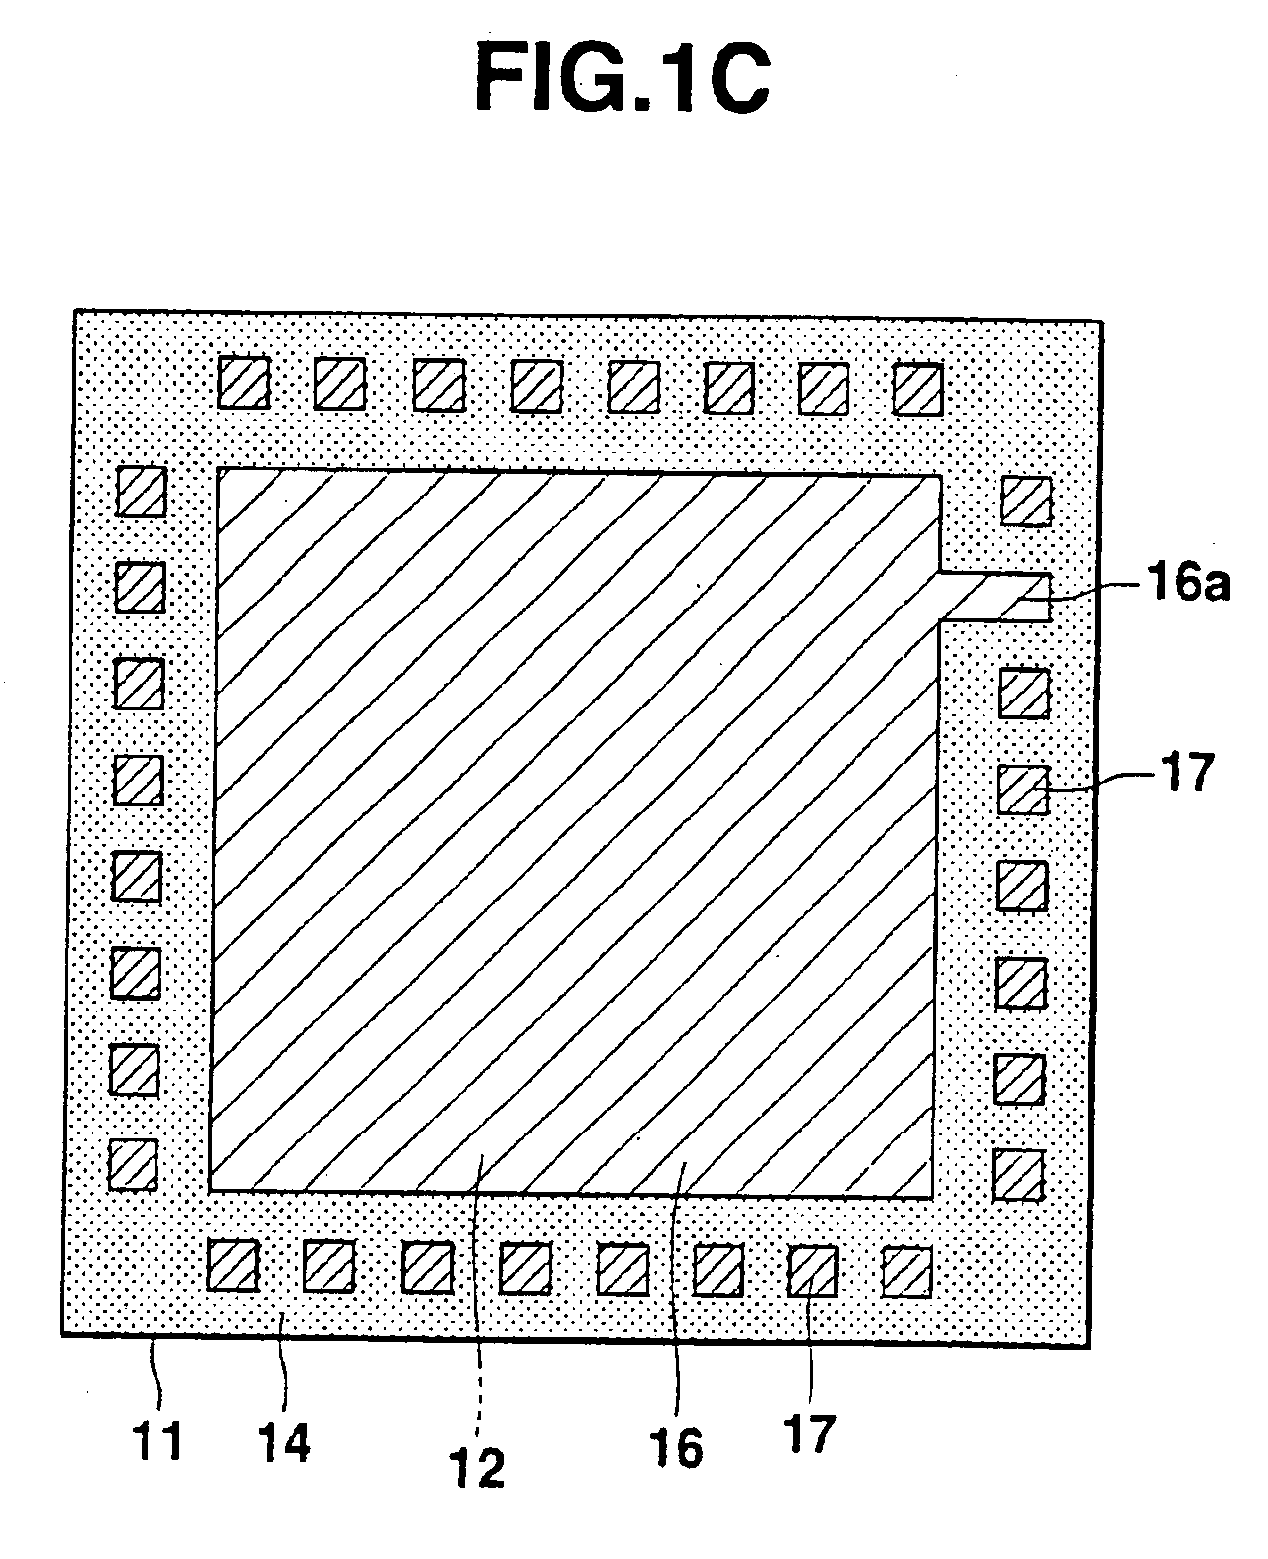 Semiconductor device having a thin-film circuit element provided above an integrated circuit